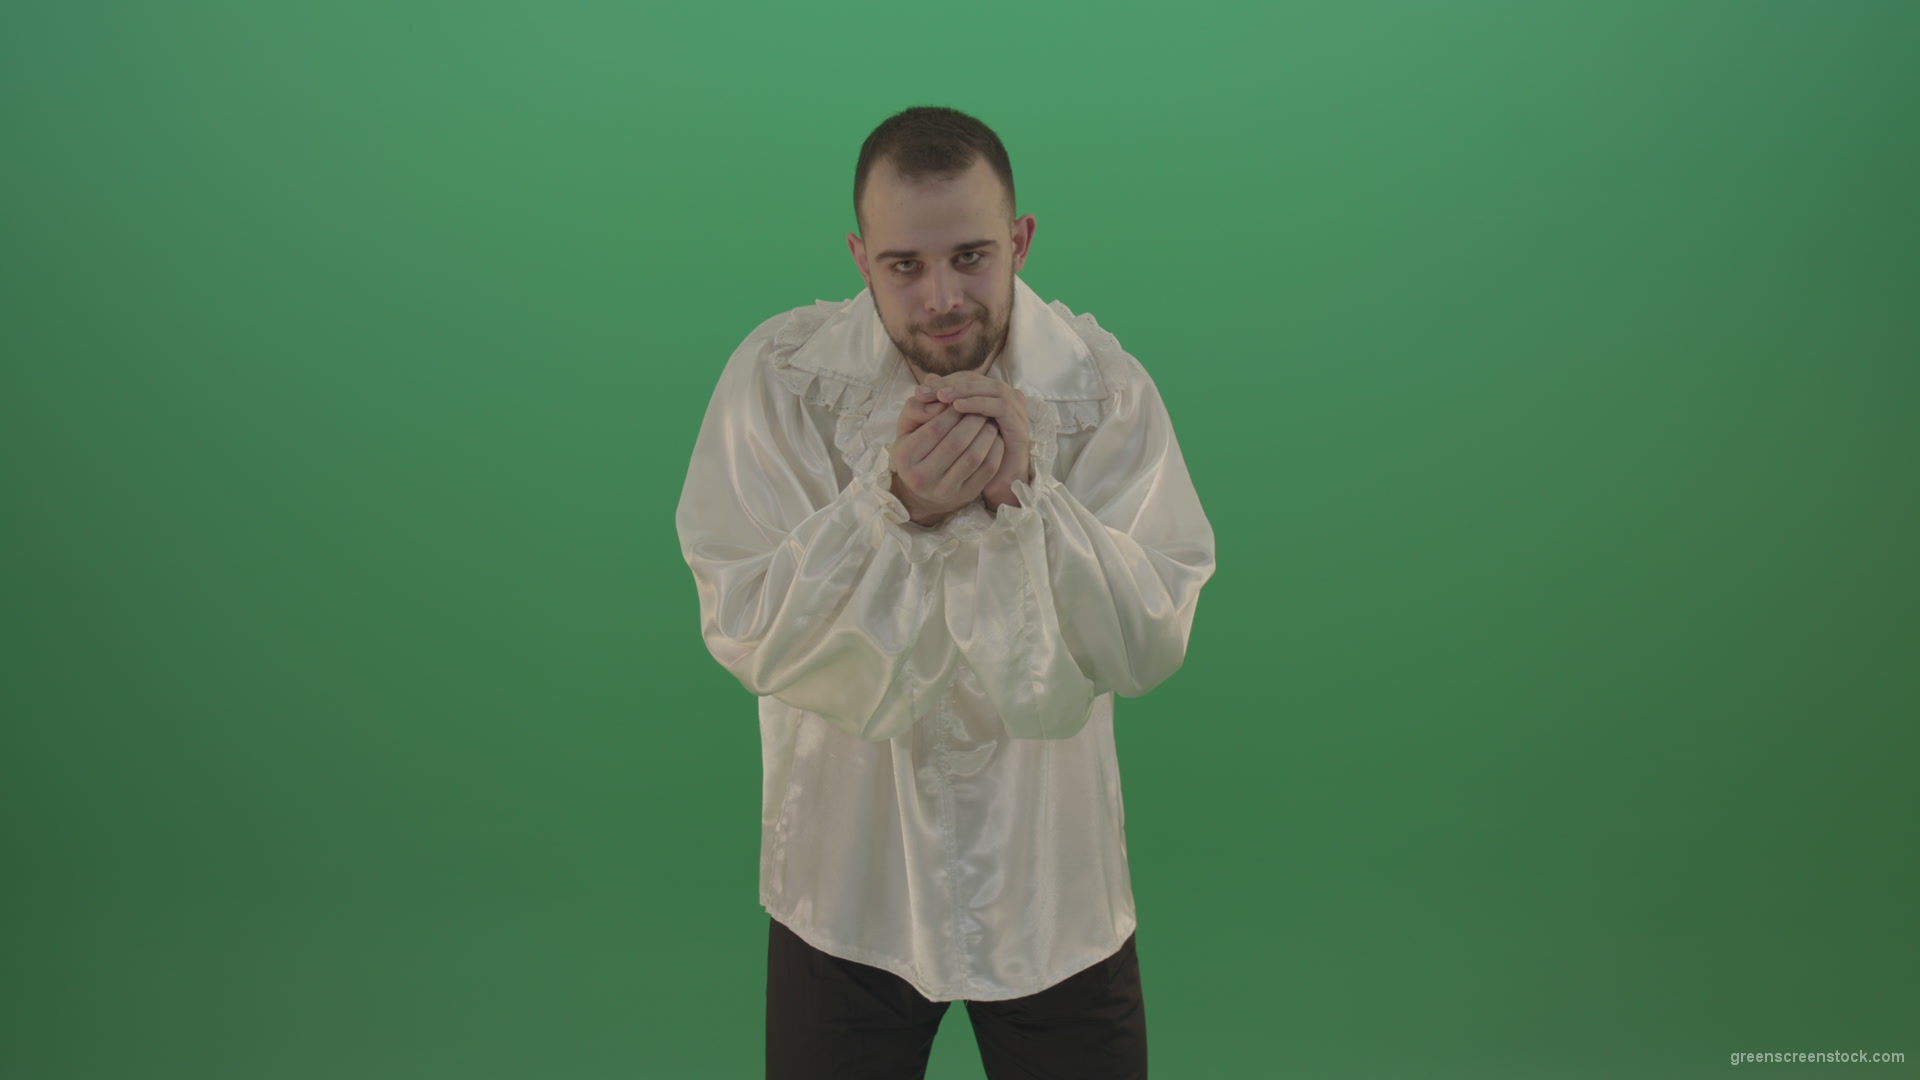 Boy-gives-flower-squeezing-in-the-sleeves-elegantly-in-hand-isolated-on-green-screen_006 Green Screen Stock